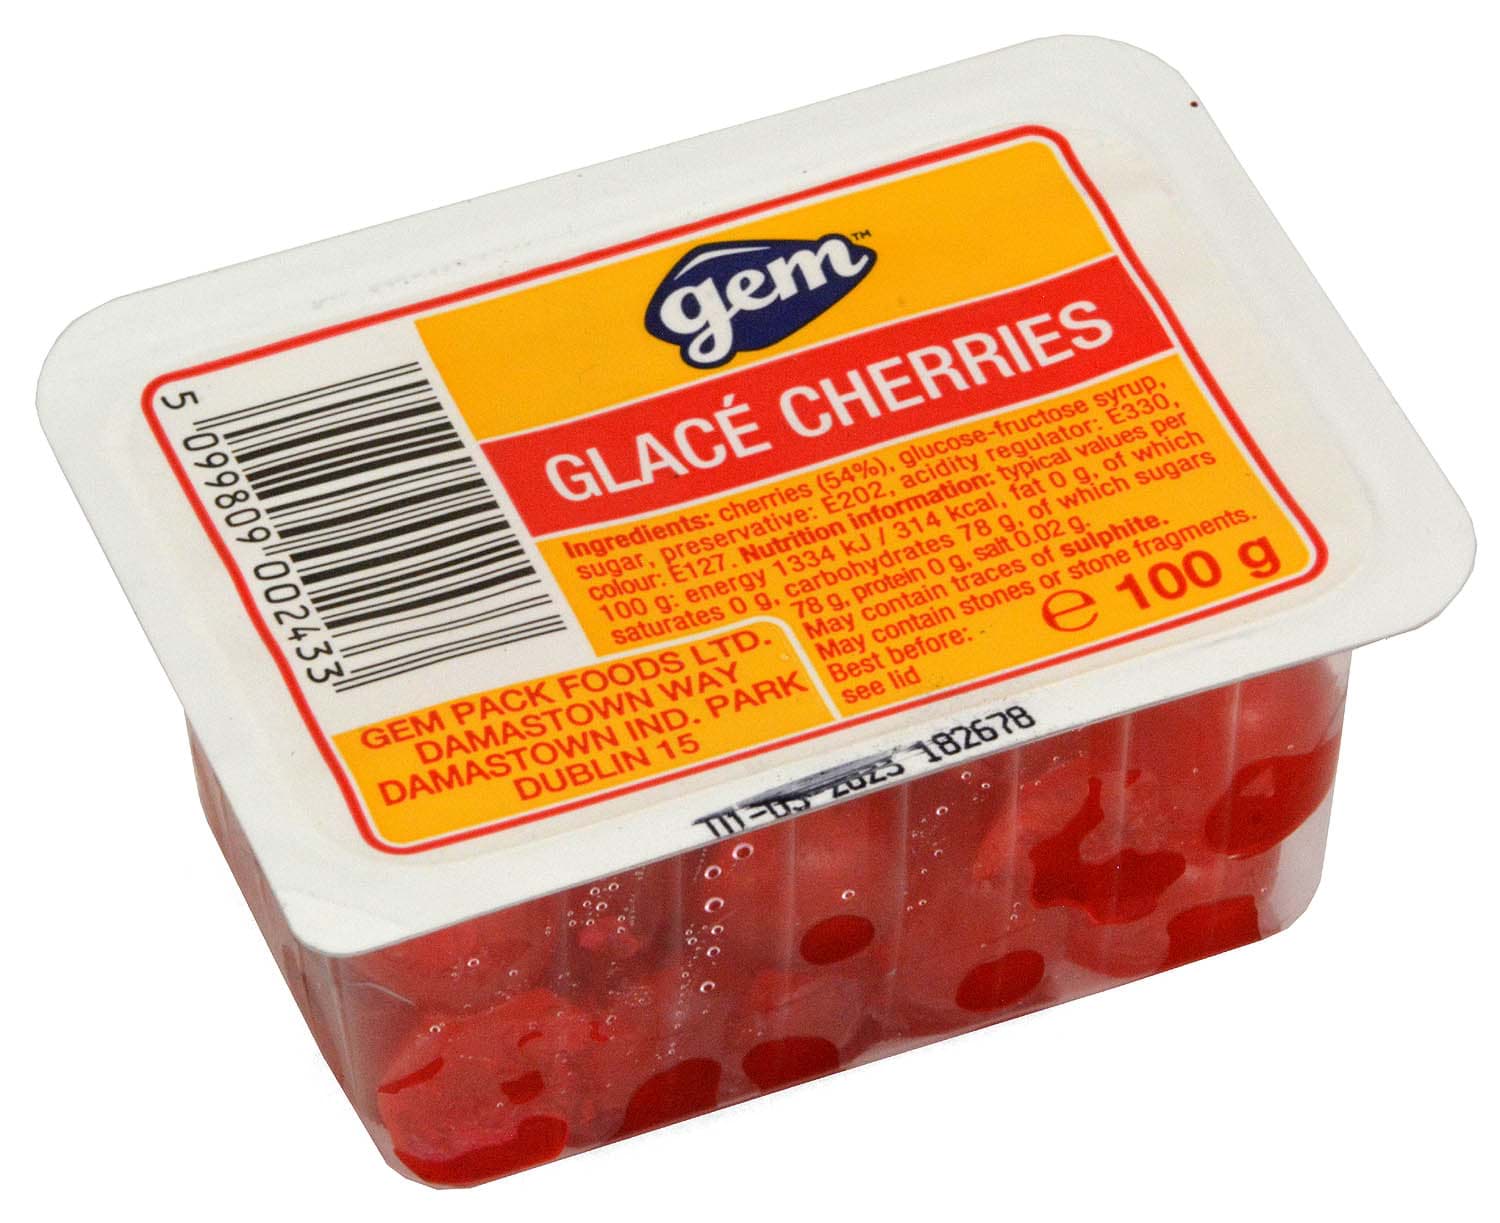 Picture of Gem Glacé Cherries 100g